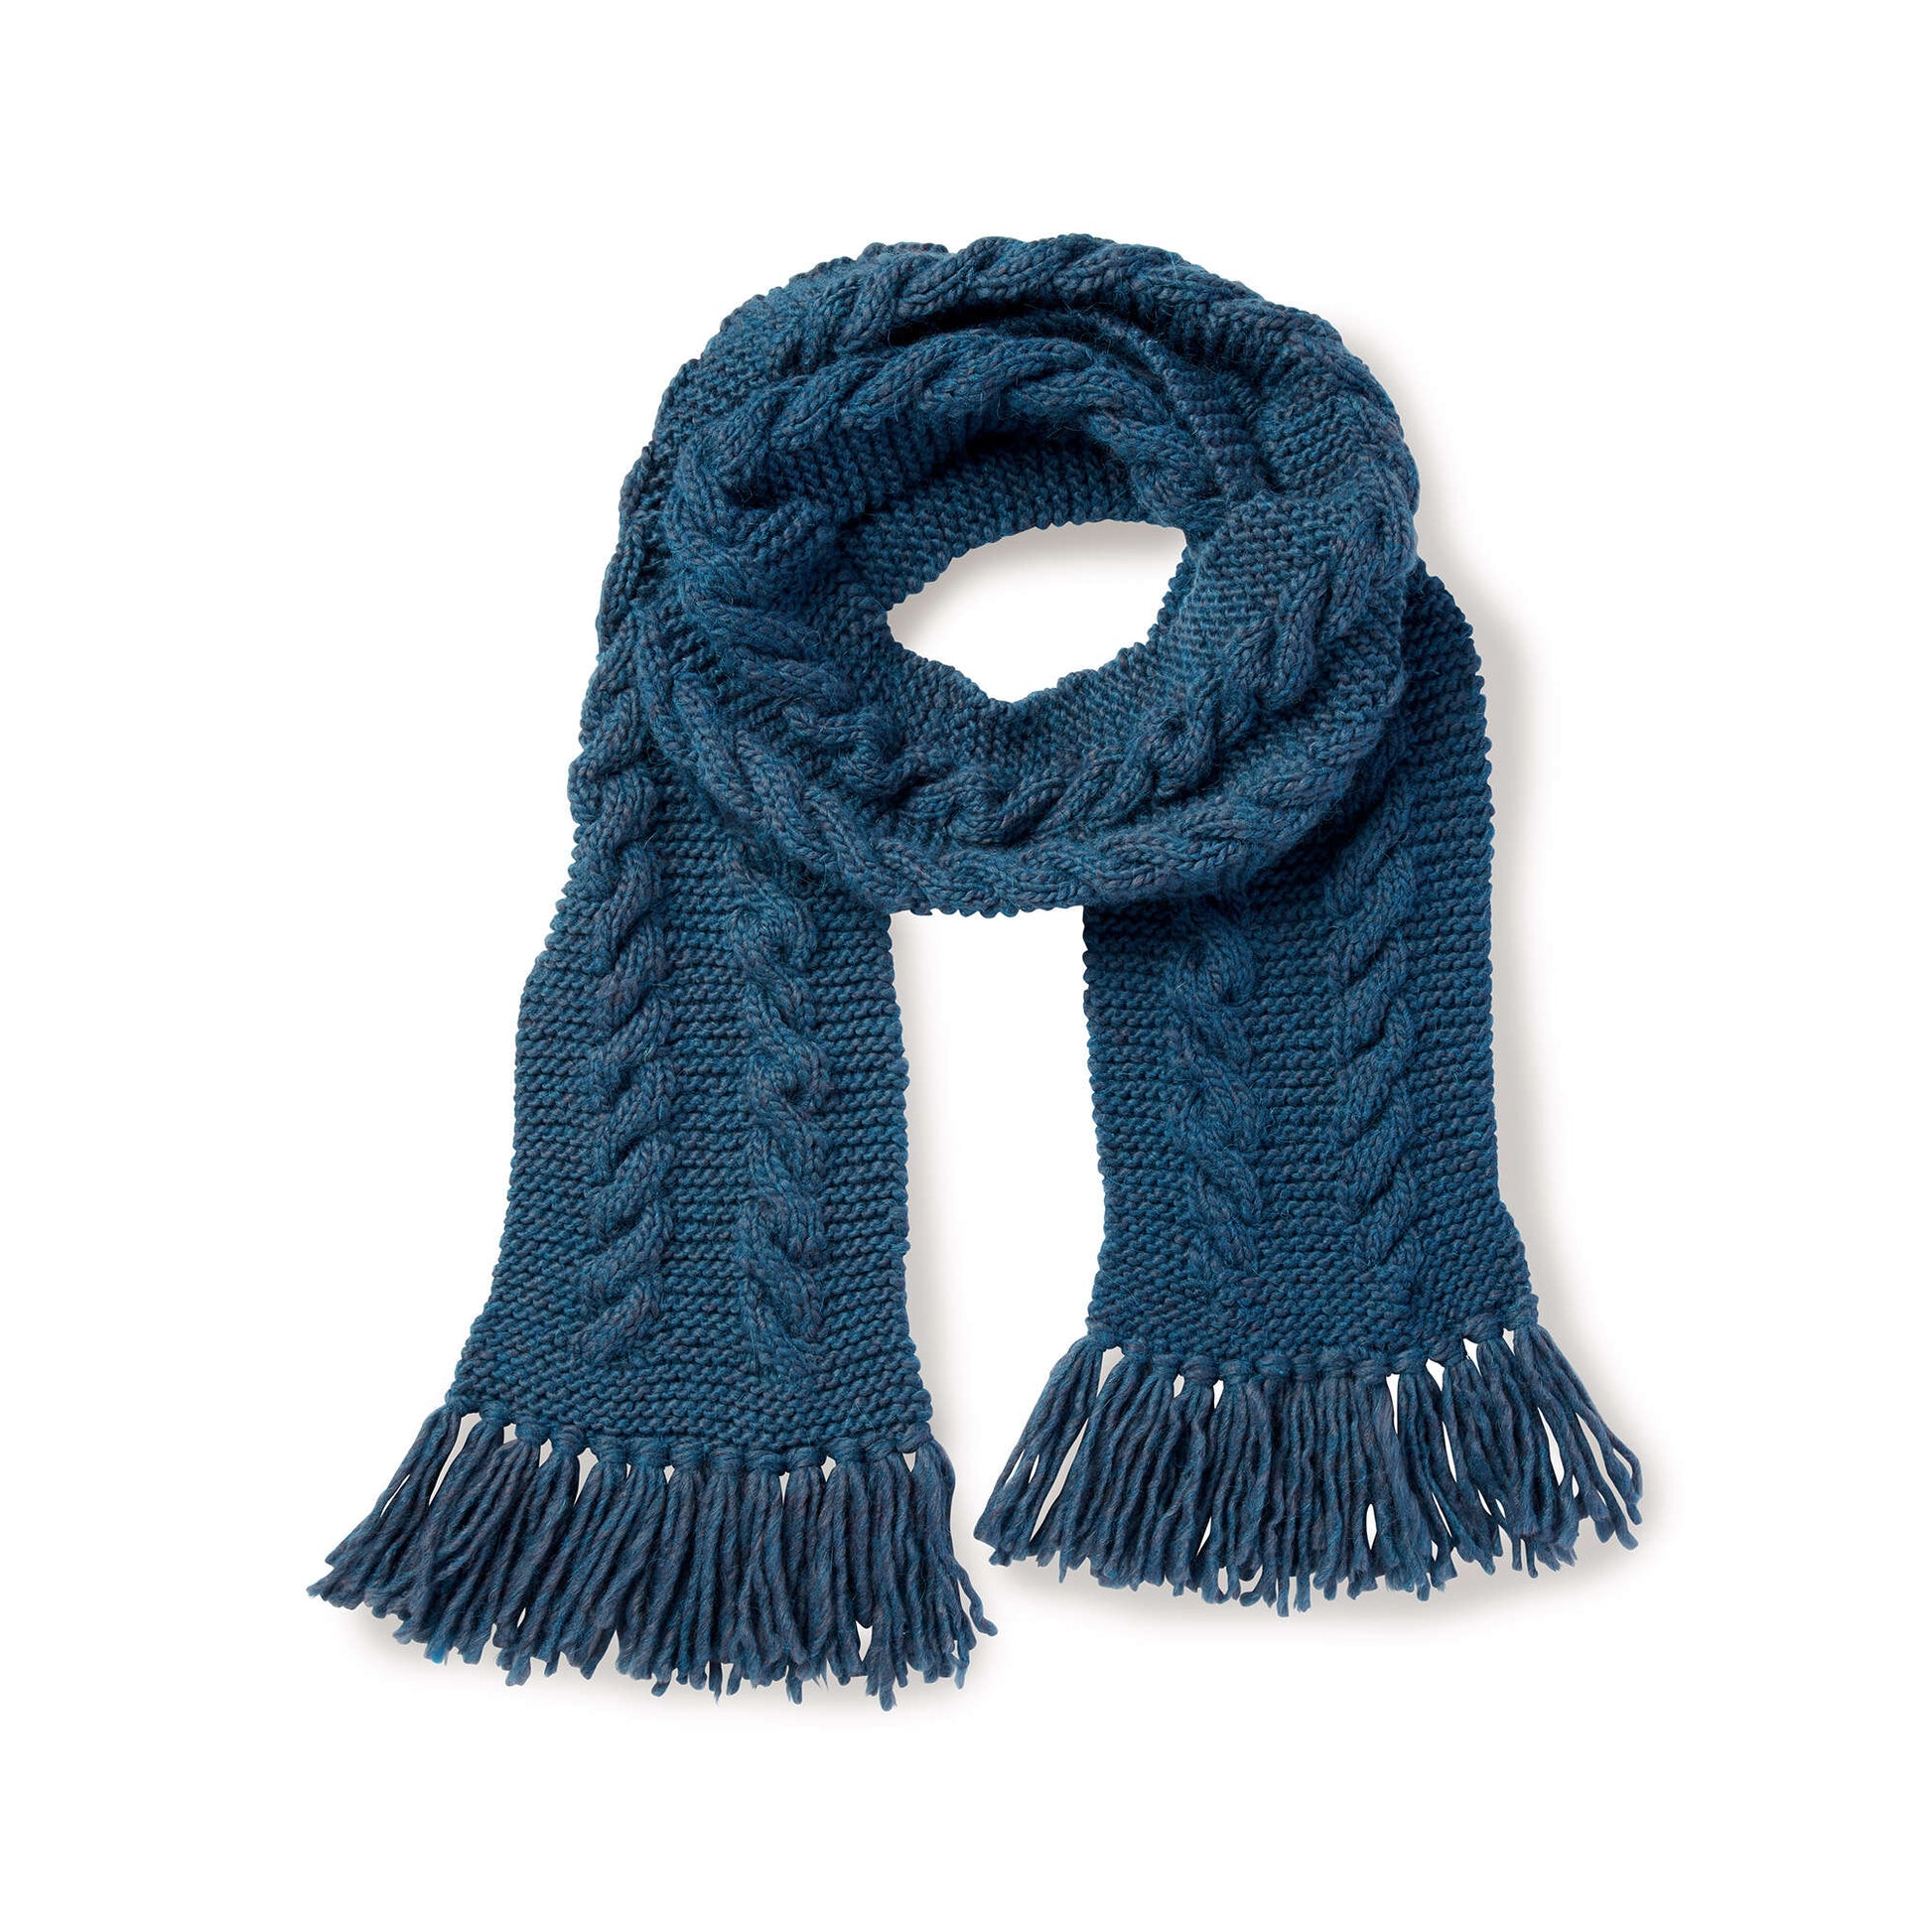 Free Patons Cable Knit Scarf Pattern